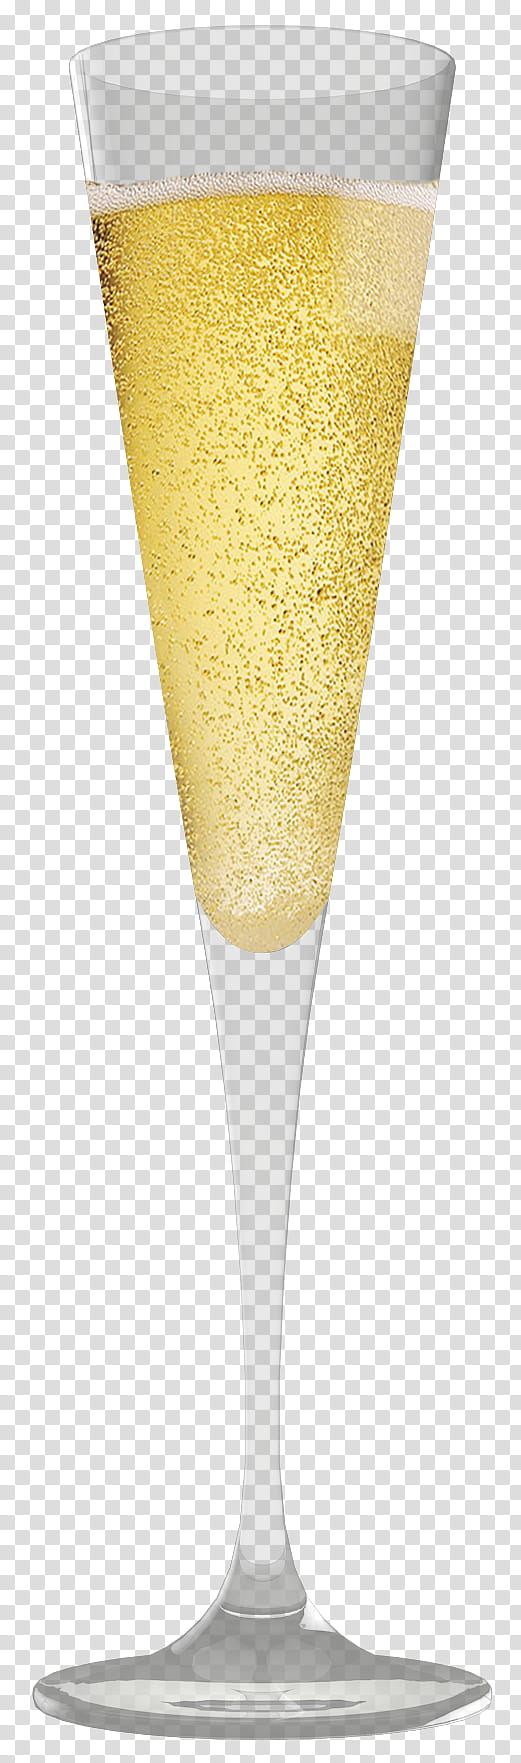 Wine Glass, Champagne Cocktail, Champagne Glass, Cocktail Glass, Alcoholic Beverages, Stemware, Toast, Drink transparent background PNG clipart